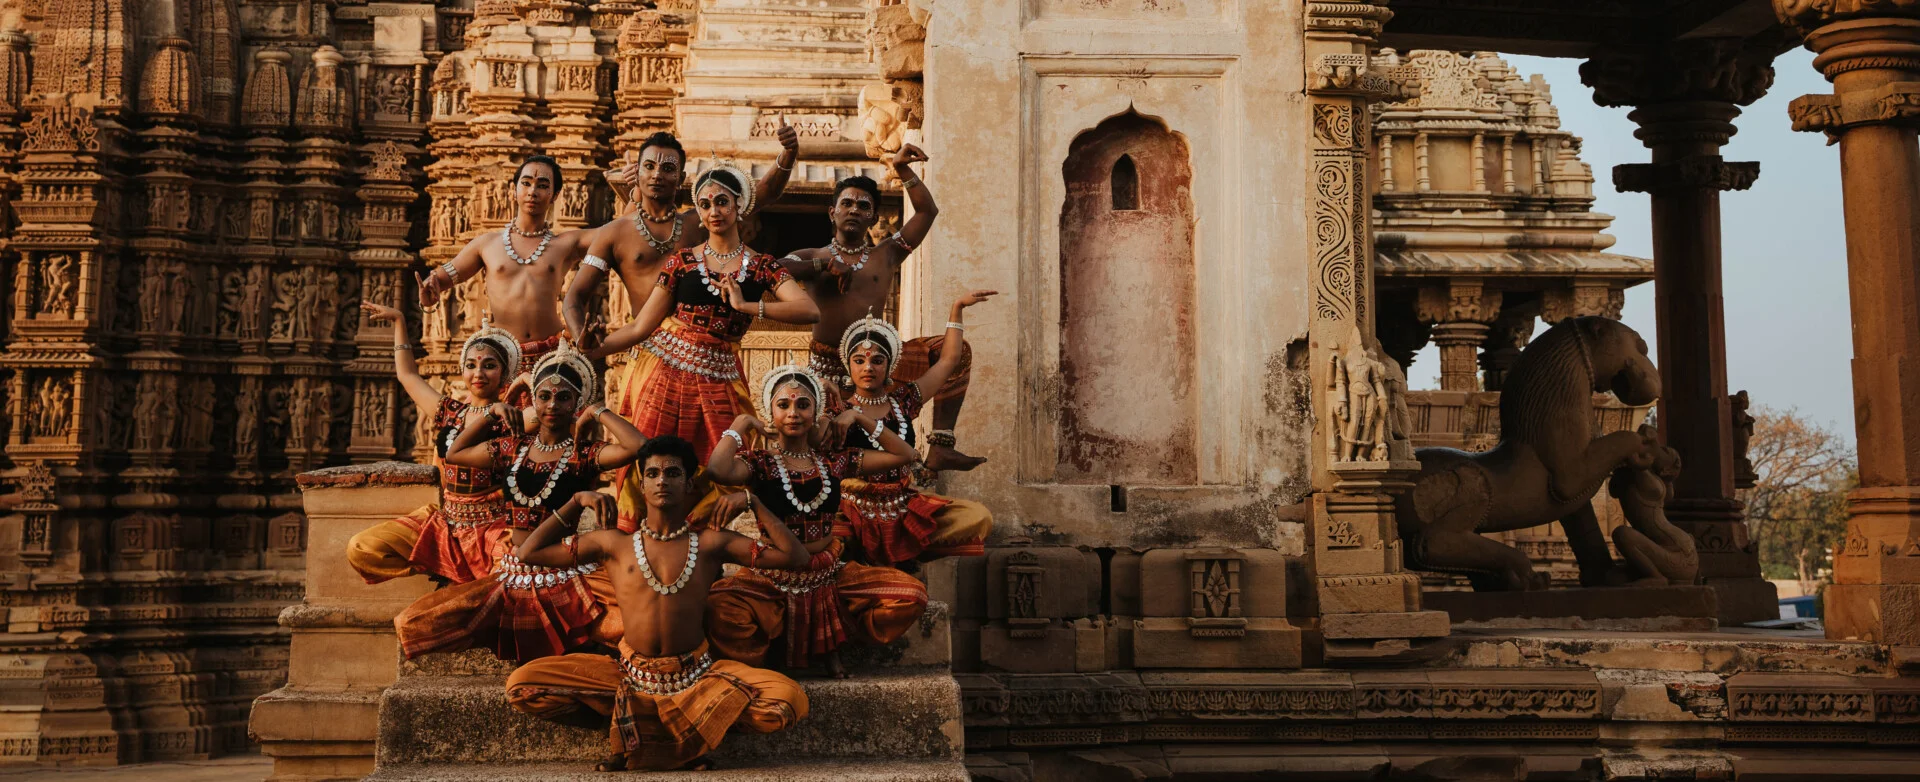 Sutra Dancers at the Khajuraho temples by S Magendran